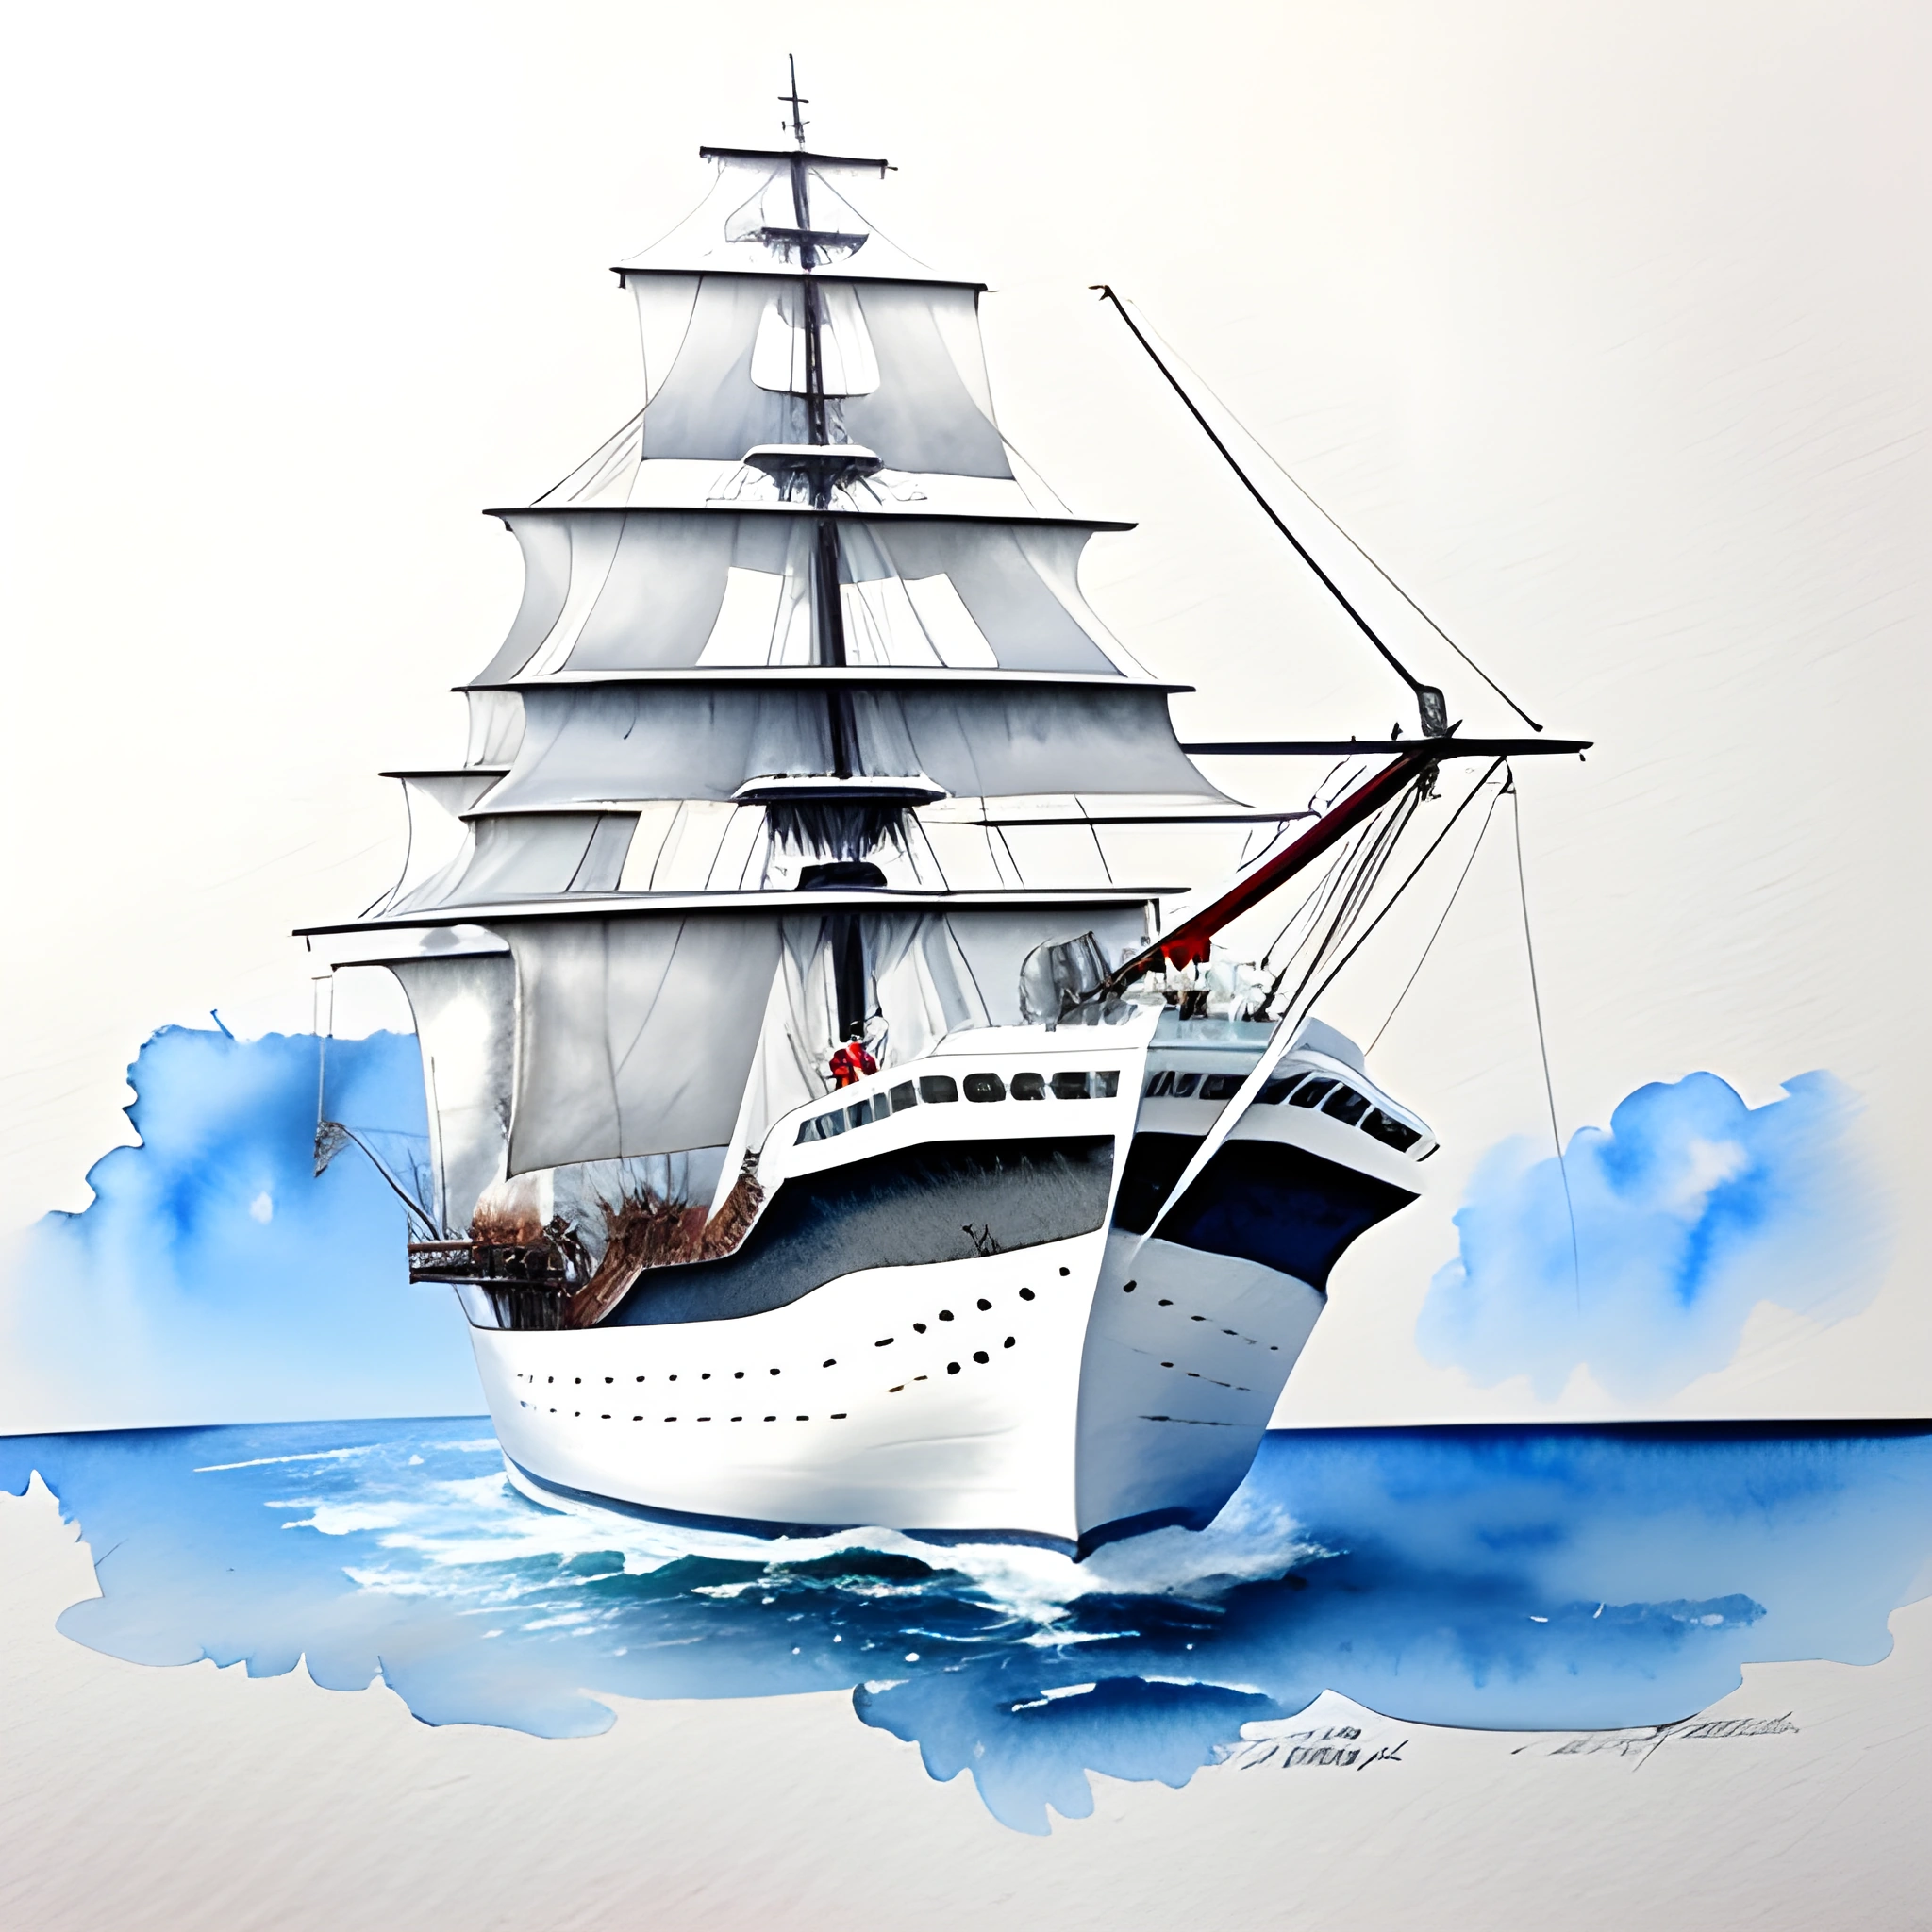 painting of a large white ship in the ocean with a blue sky